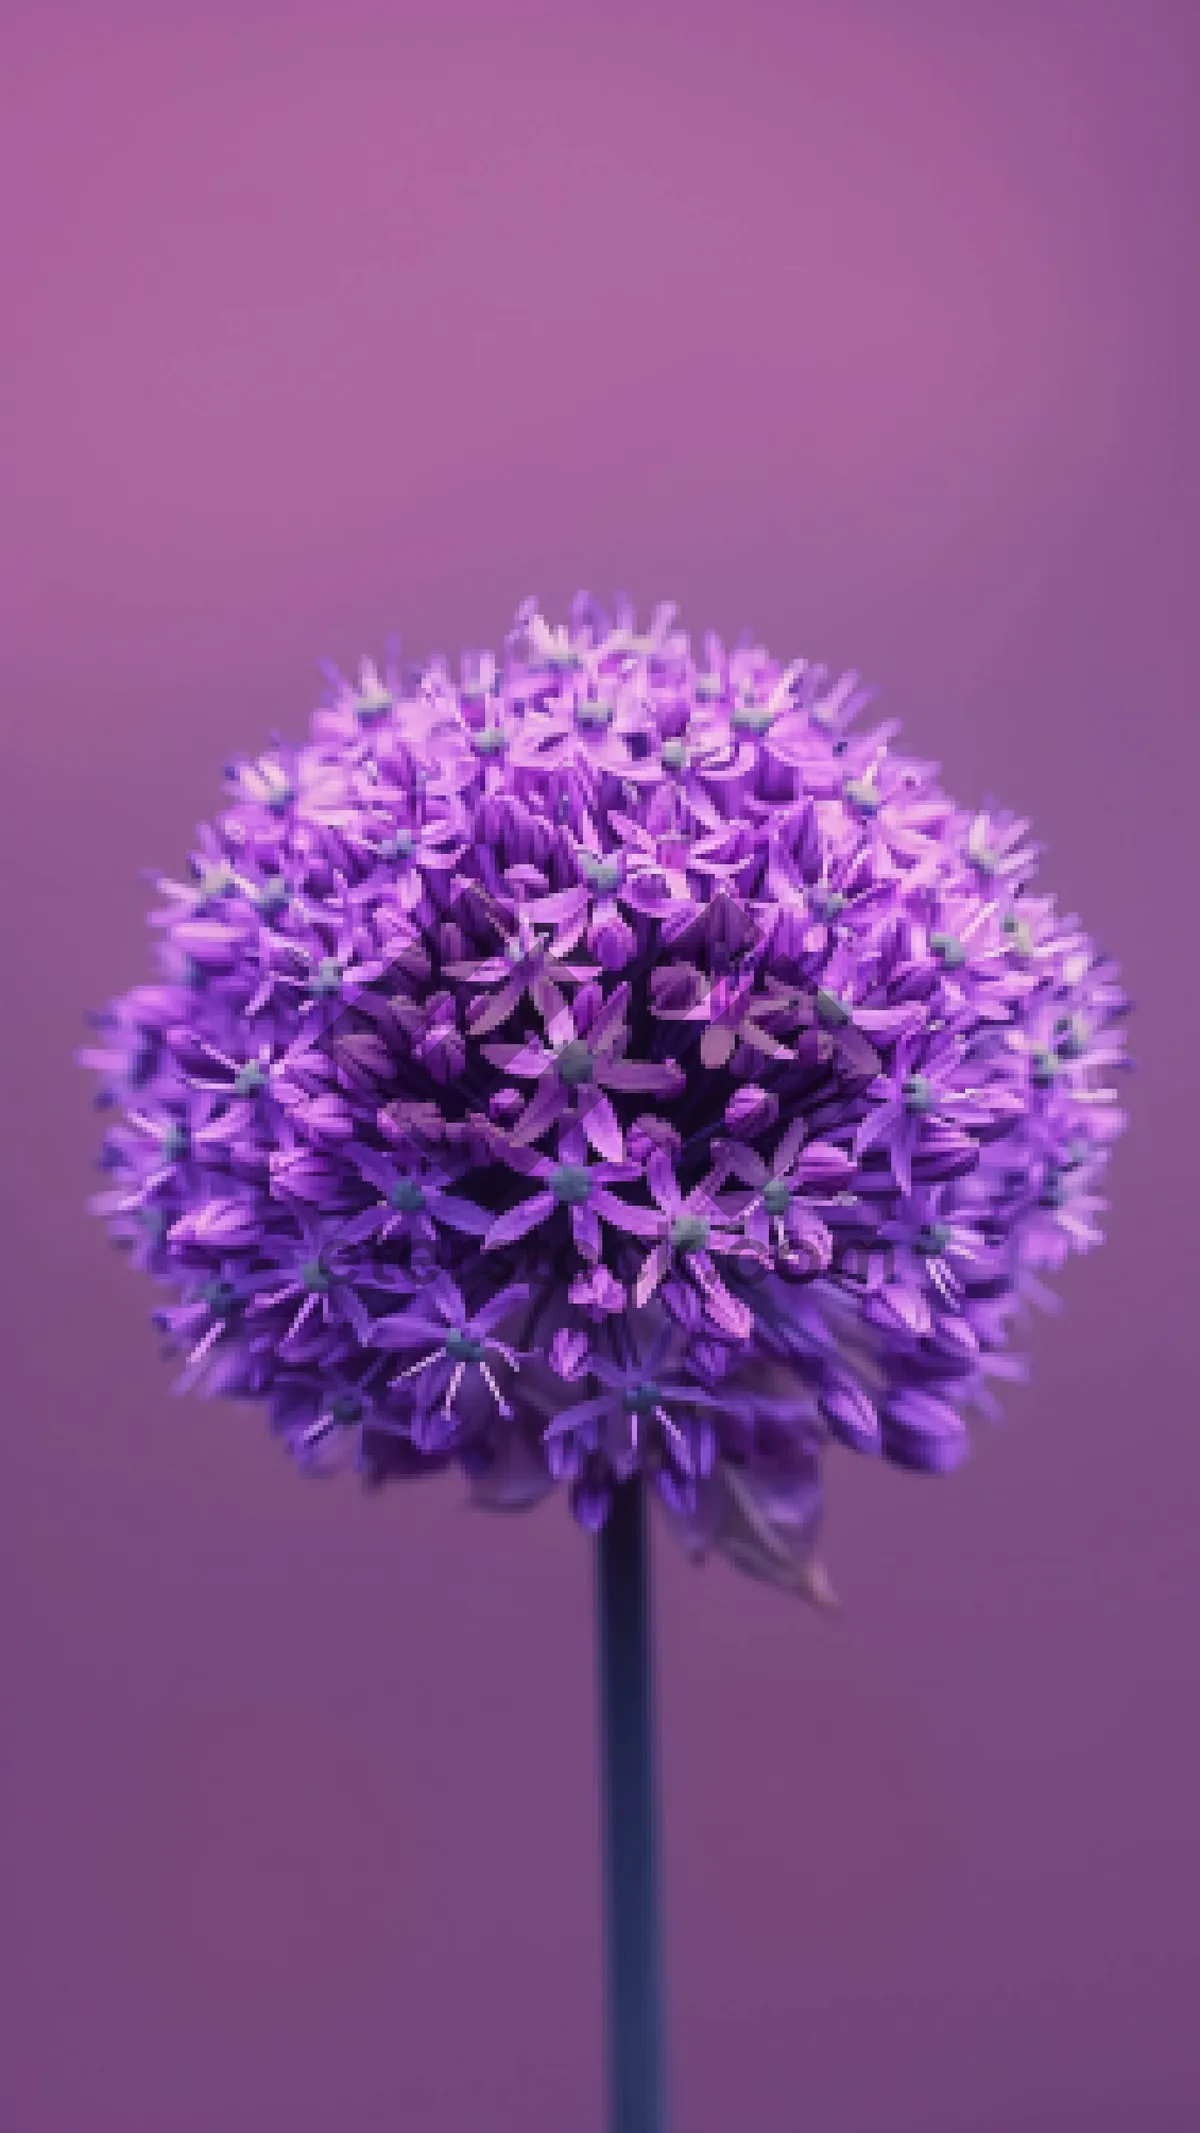 Picture of Spring garden blooms with lilac globe thistle